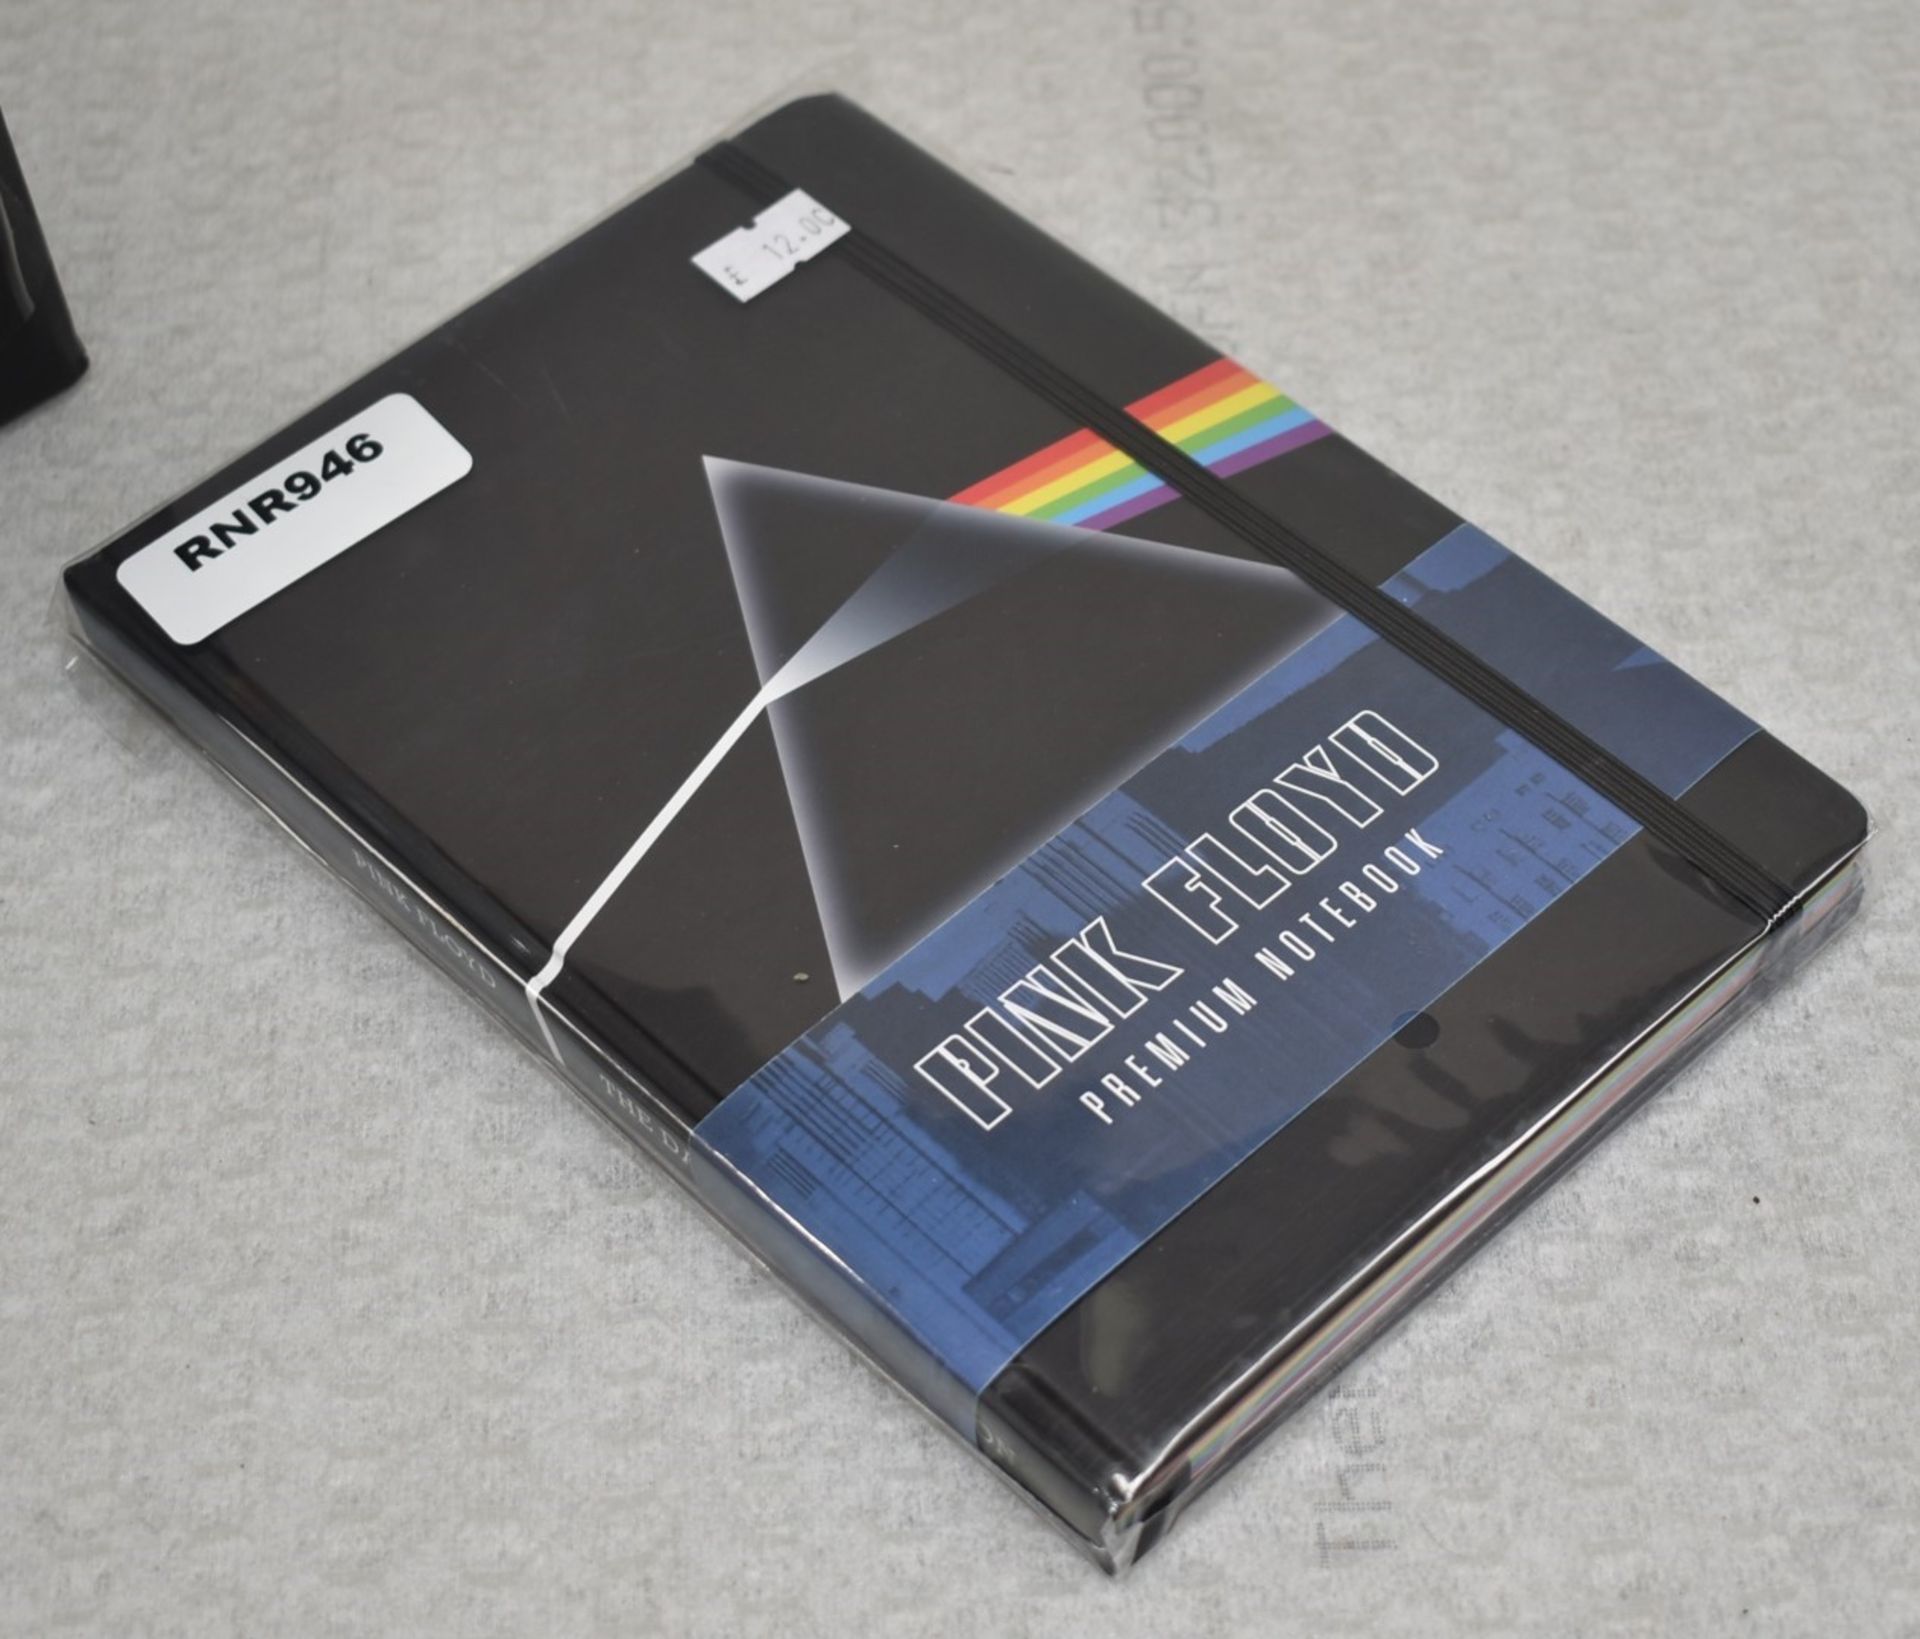 1 x Pink Floyd Premium A5 Notebook - Officially Licensed Merchandise - New & Unused - Ref: RR946 - Image 4 of 8